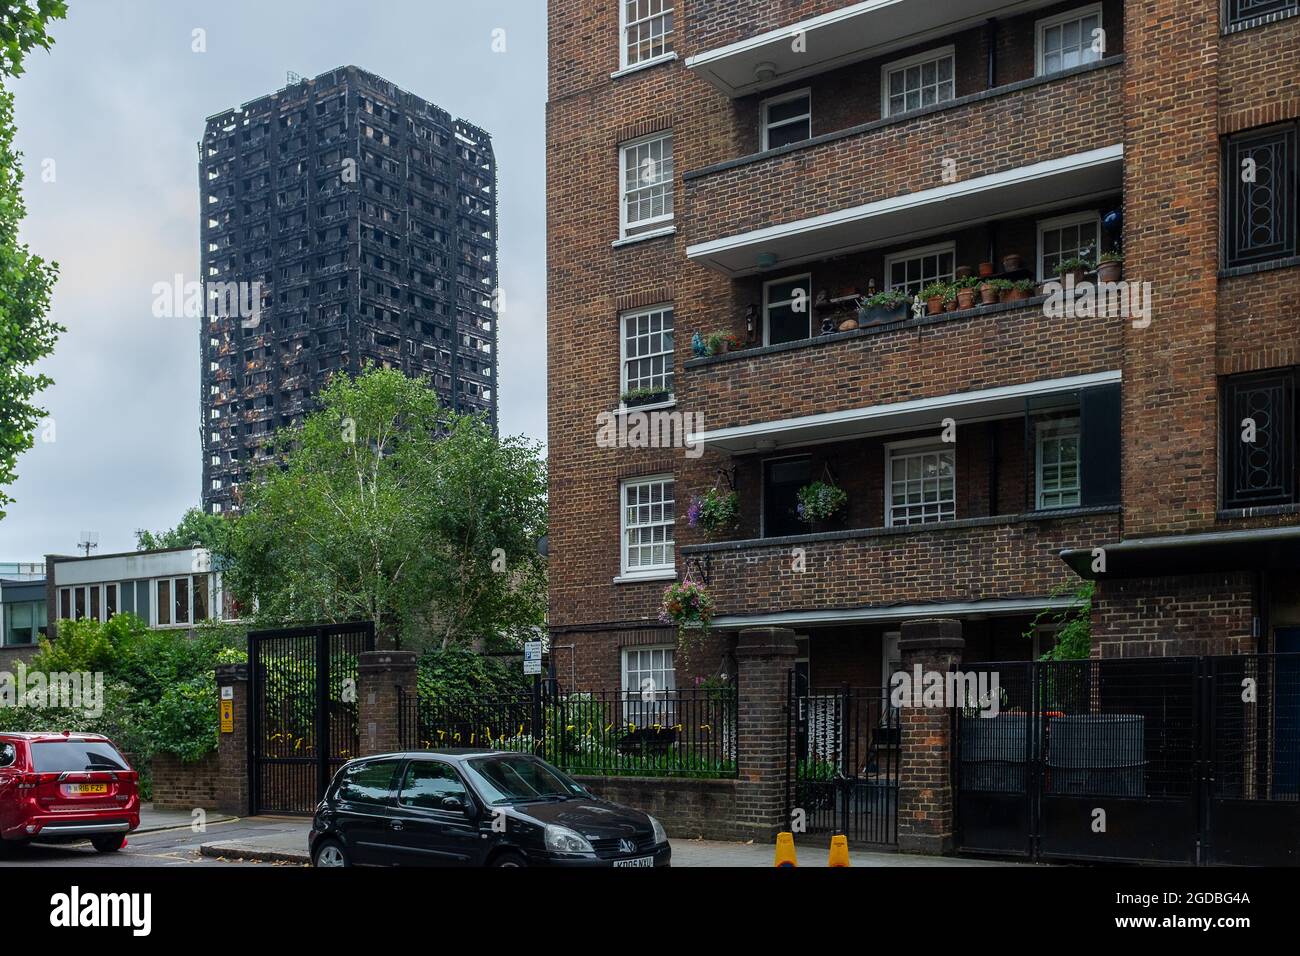 Grenfell Tower Stock Photo